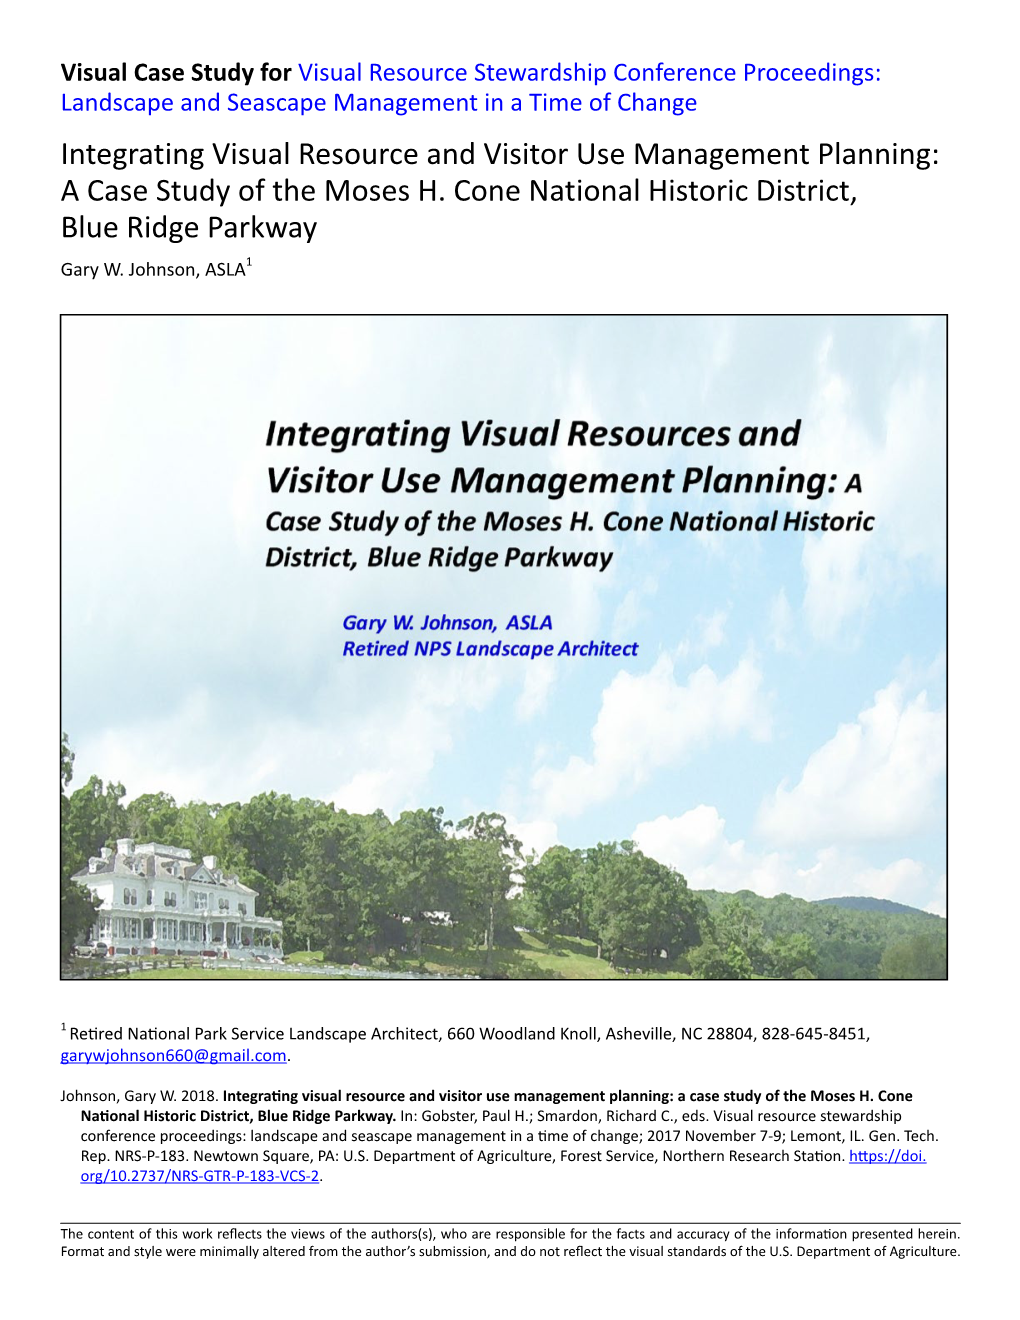 Integrating Visual Resource and Visitor Use Management Planning: a Case Study of the Moses H. Cone National Historic District, Blue Ridge Parkway Gary W